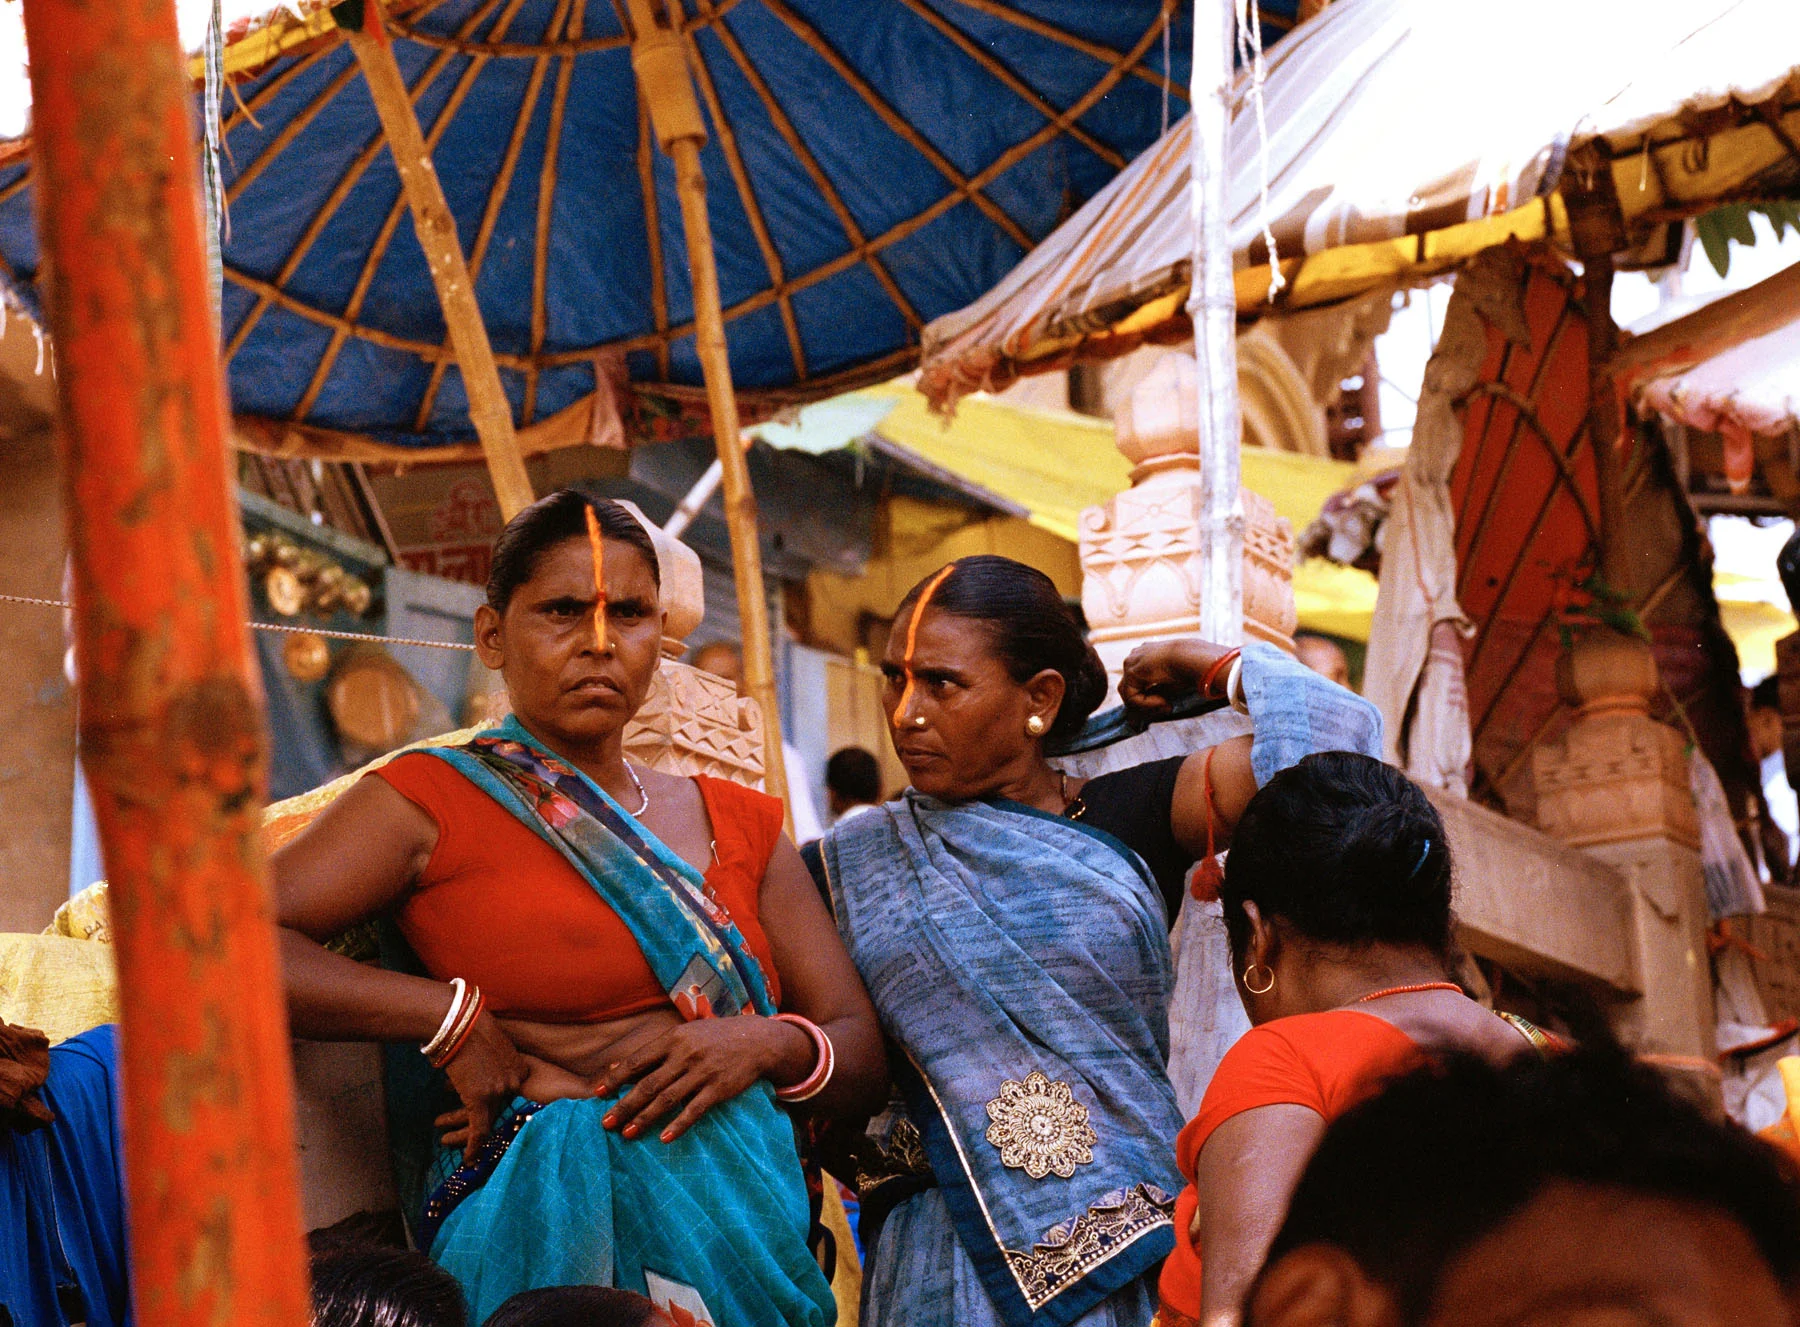 A photograph of two women wearing sarees and their faces adorned with Sindoor (red vermillion powder stretching from the tip pf the nose to the center of the head) signifying their marriage.